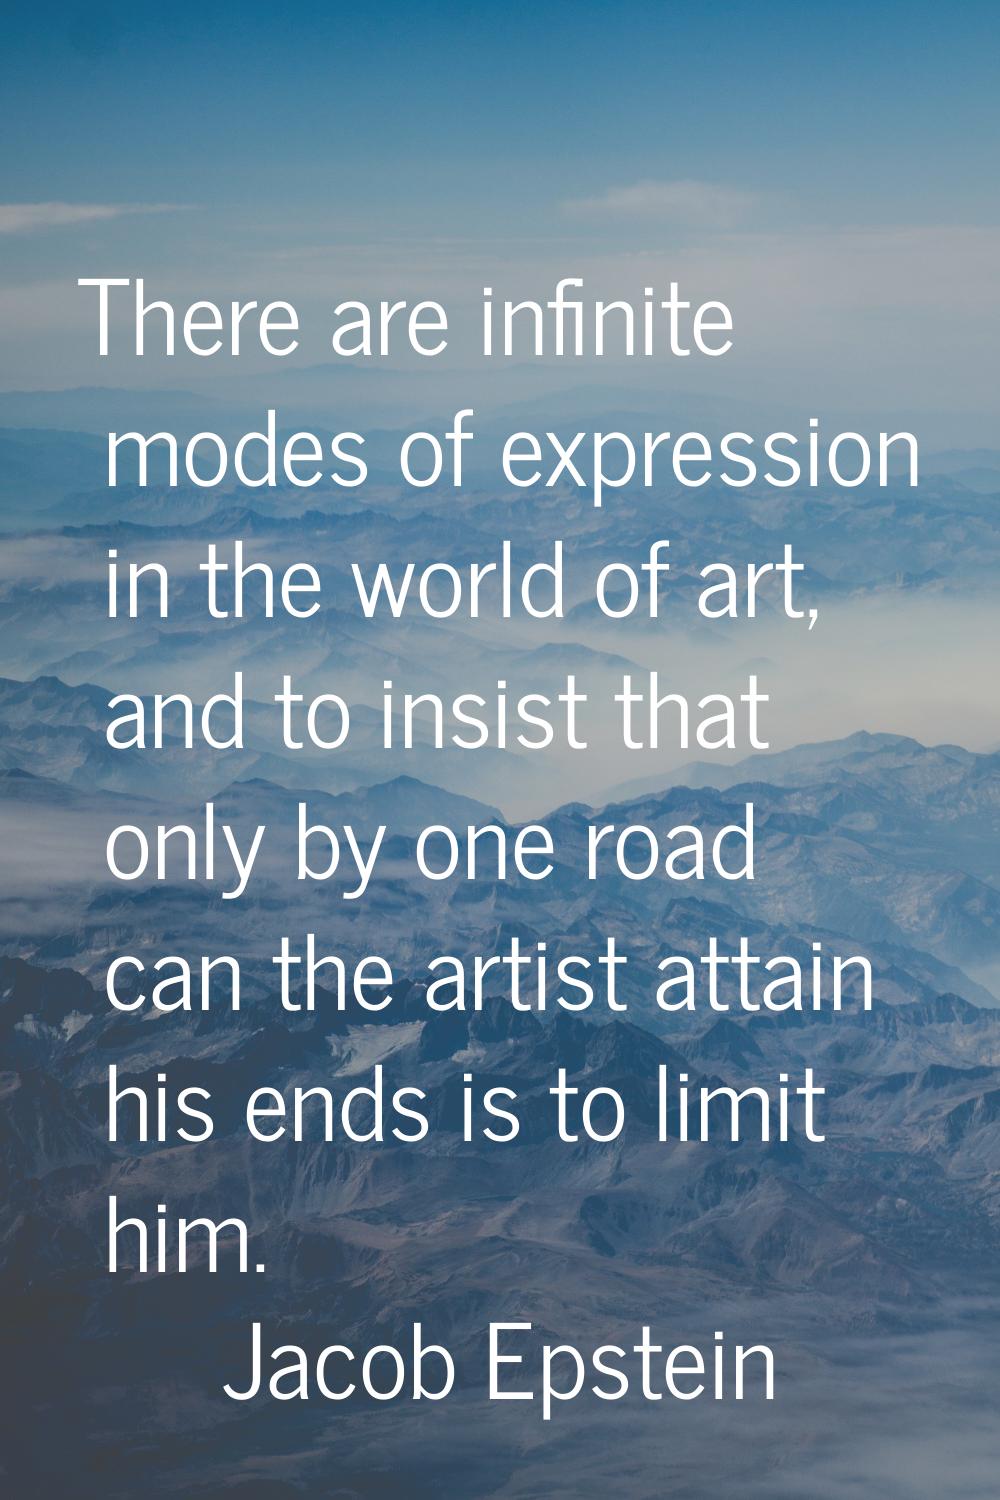 There are infinite modes of expression in the world of art, and to insist that only by one road can